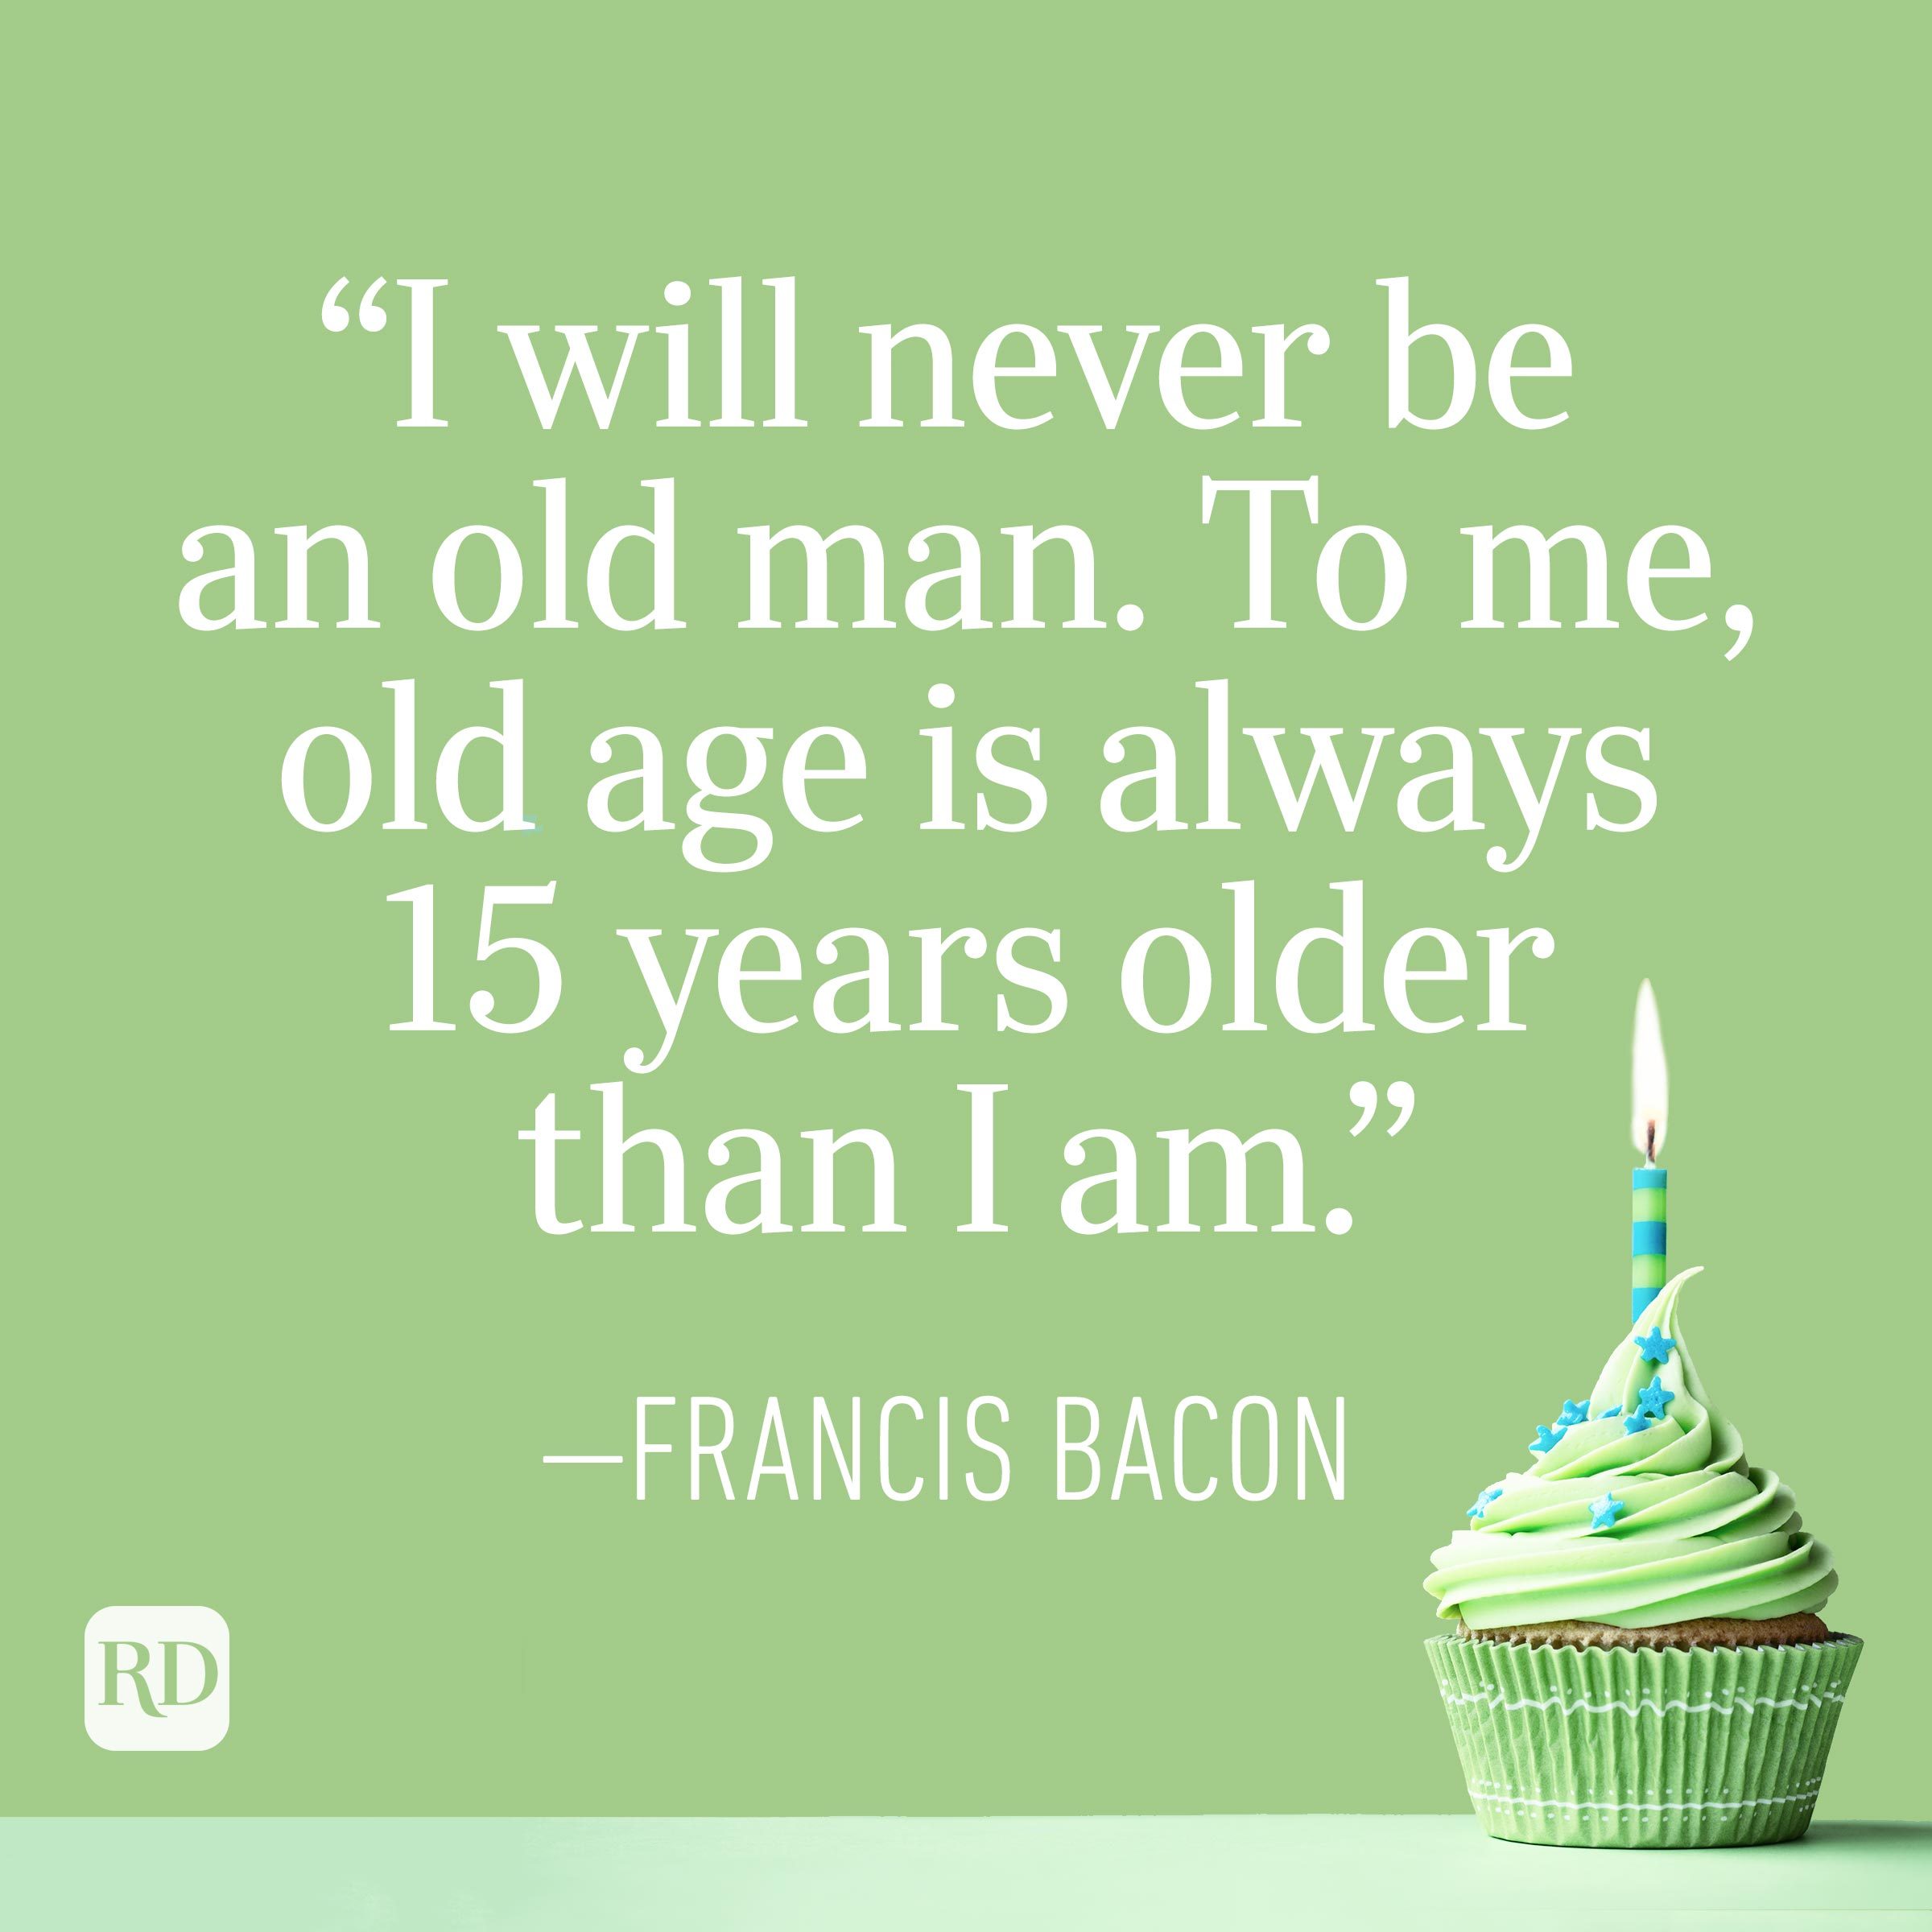 "I will never be an old man. To me, old age is always 15 years older than I am." —Francis Bacon